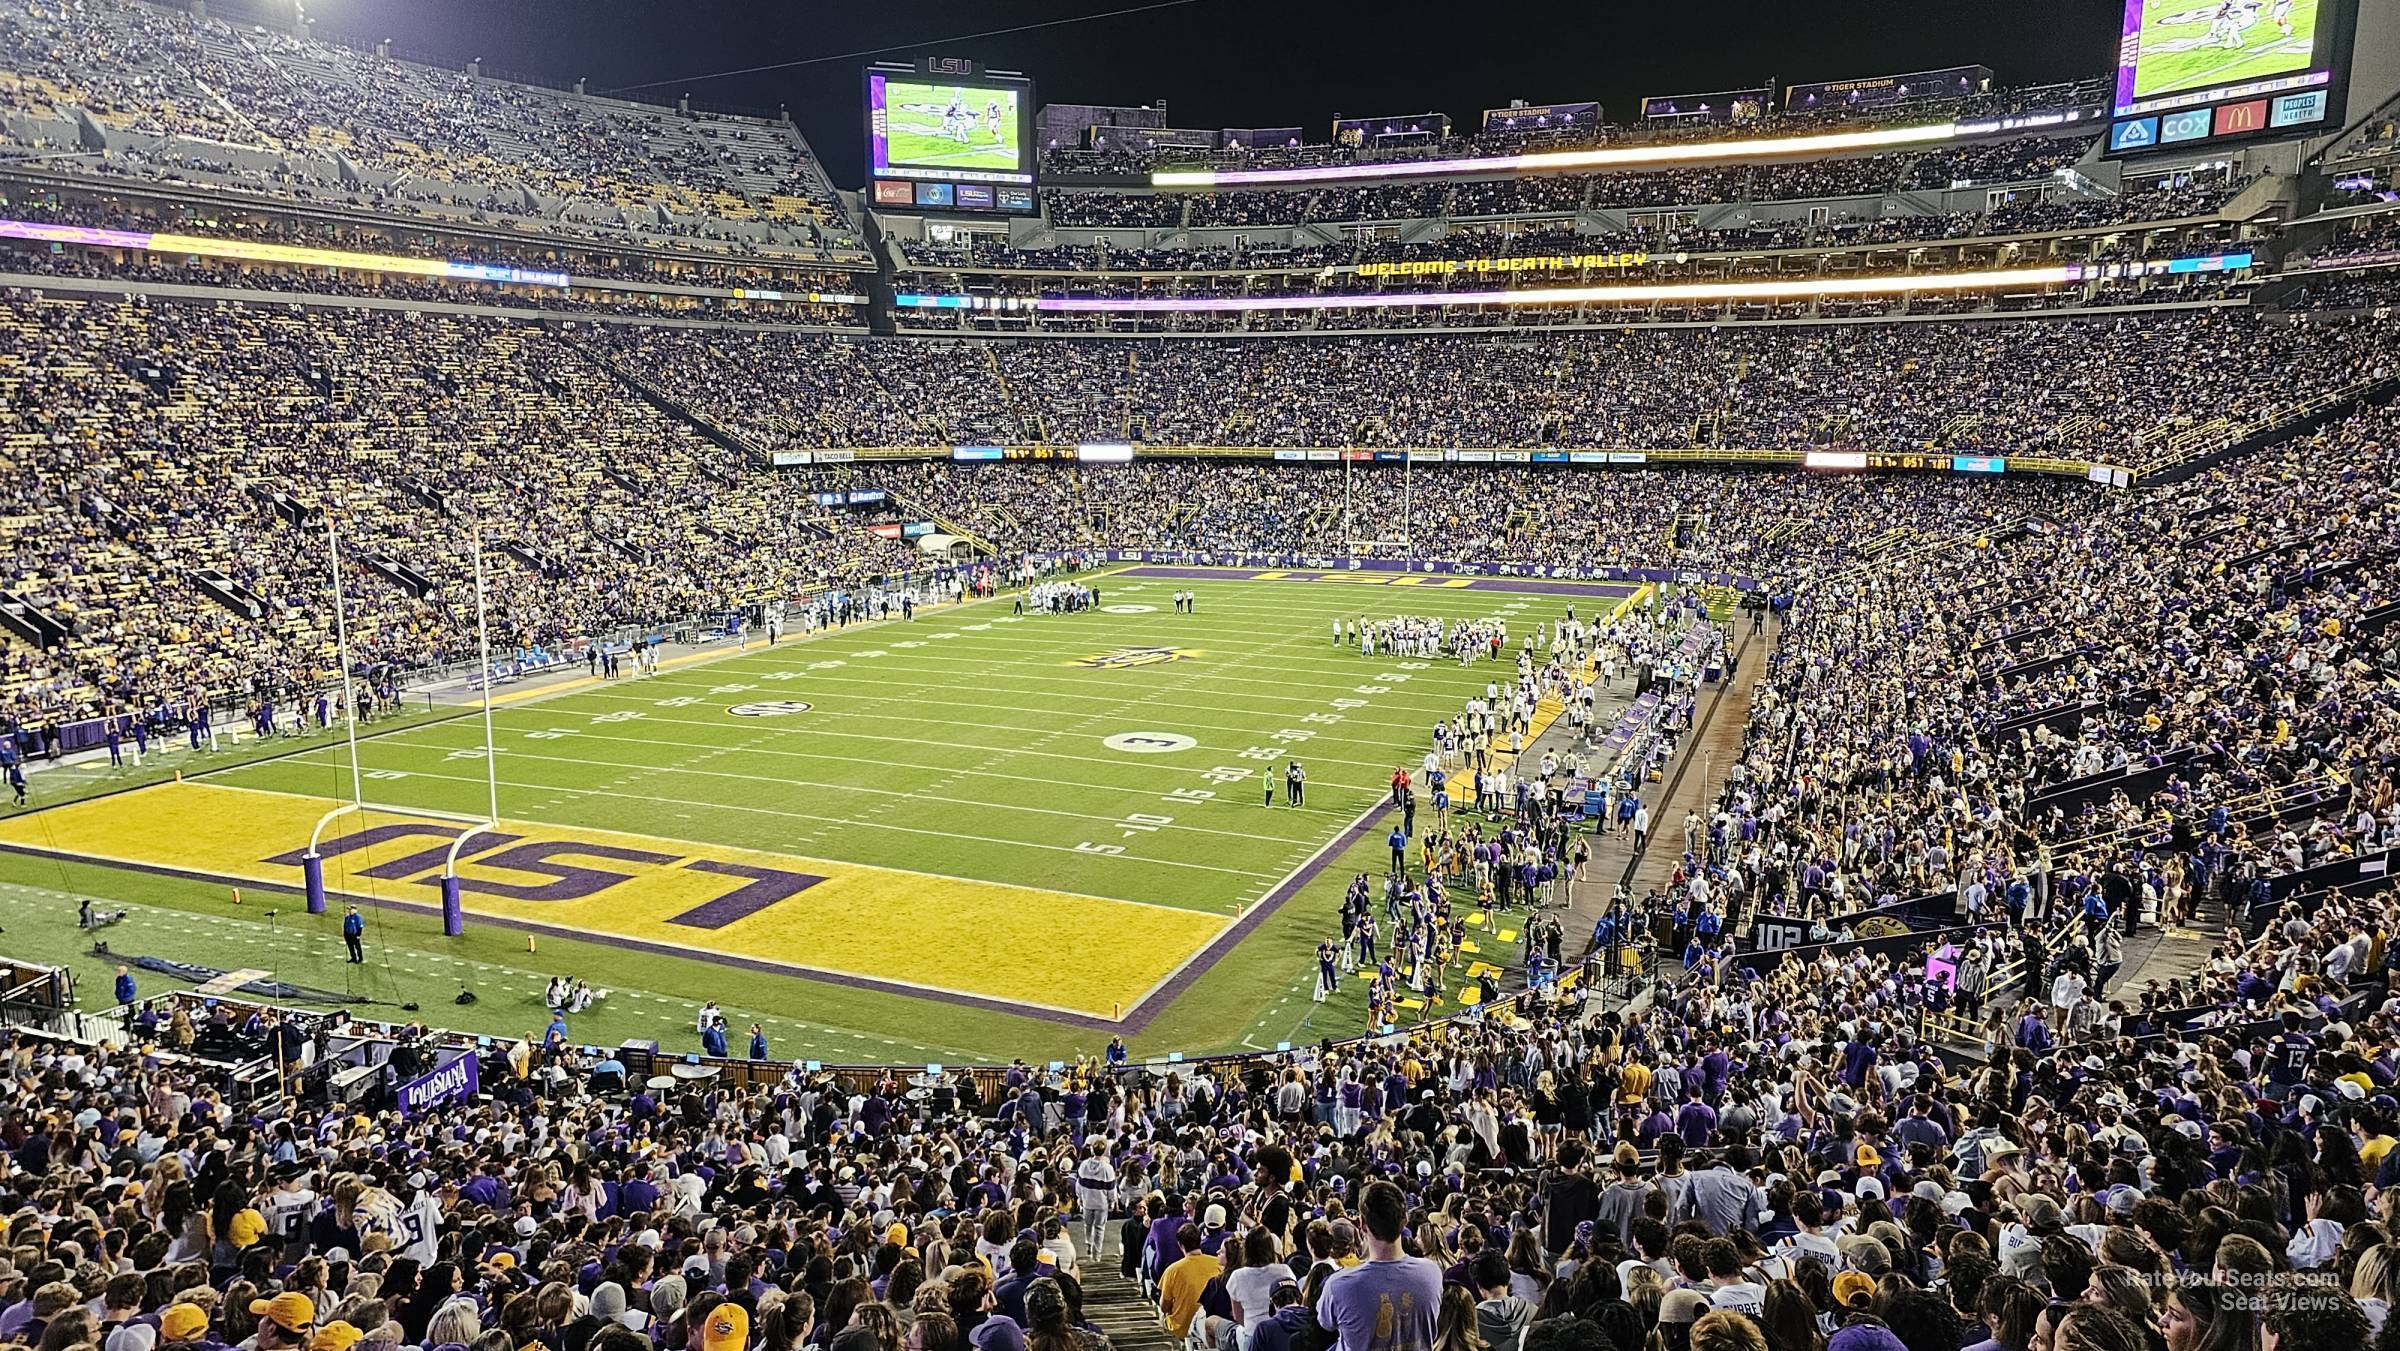 section 228, row 1 seat view  - tiger stadium